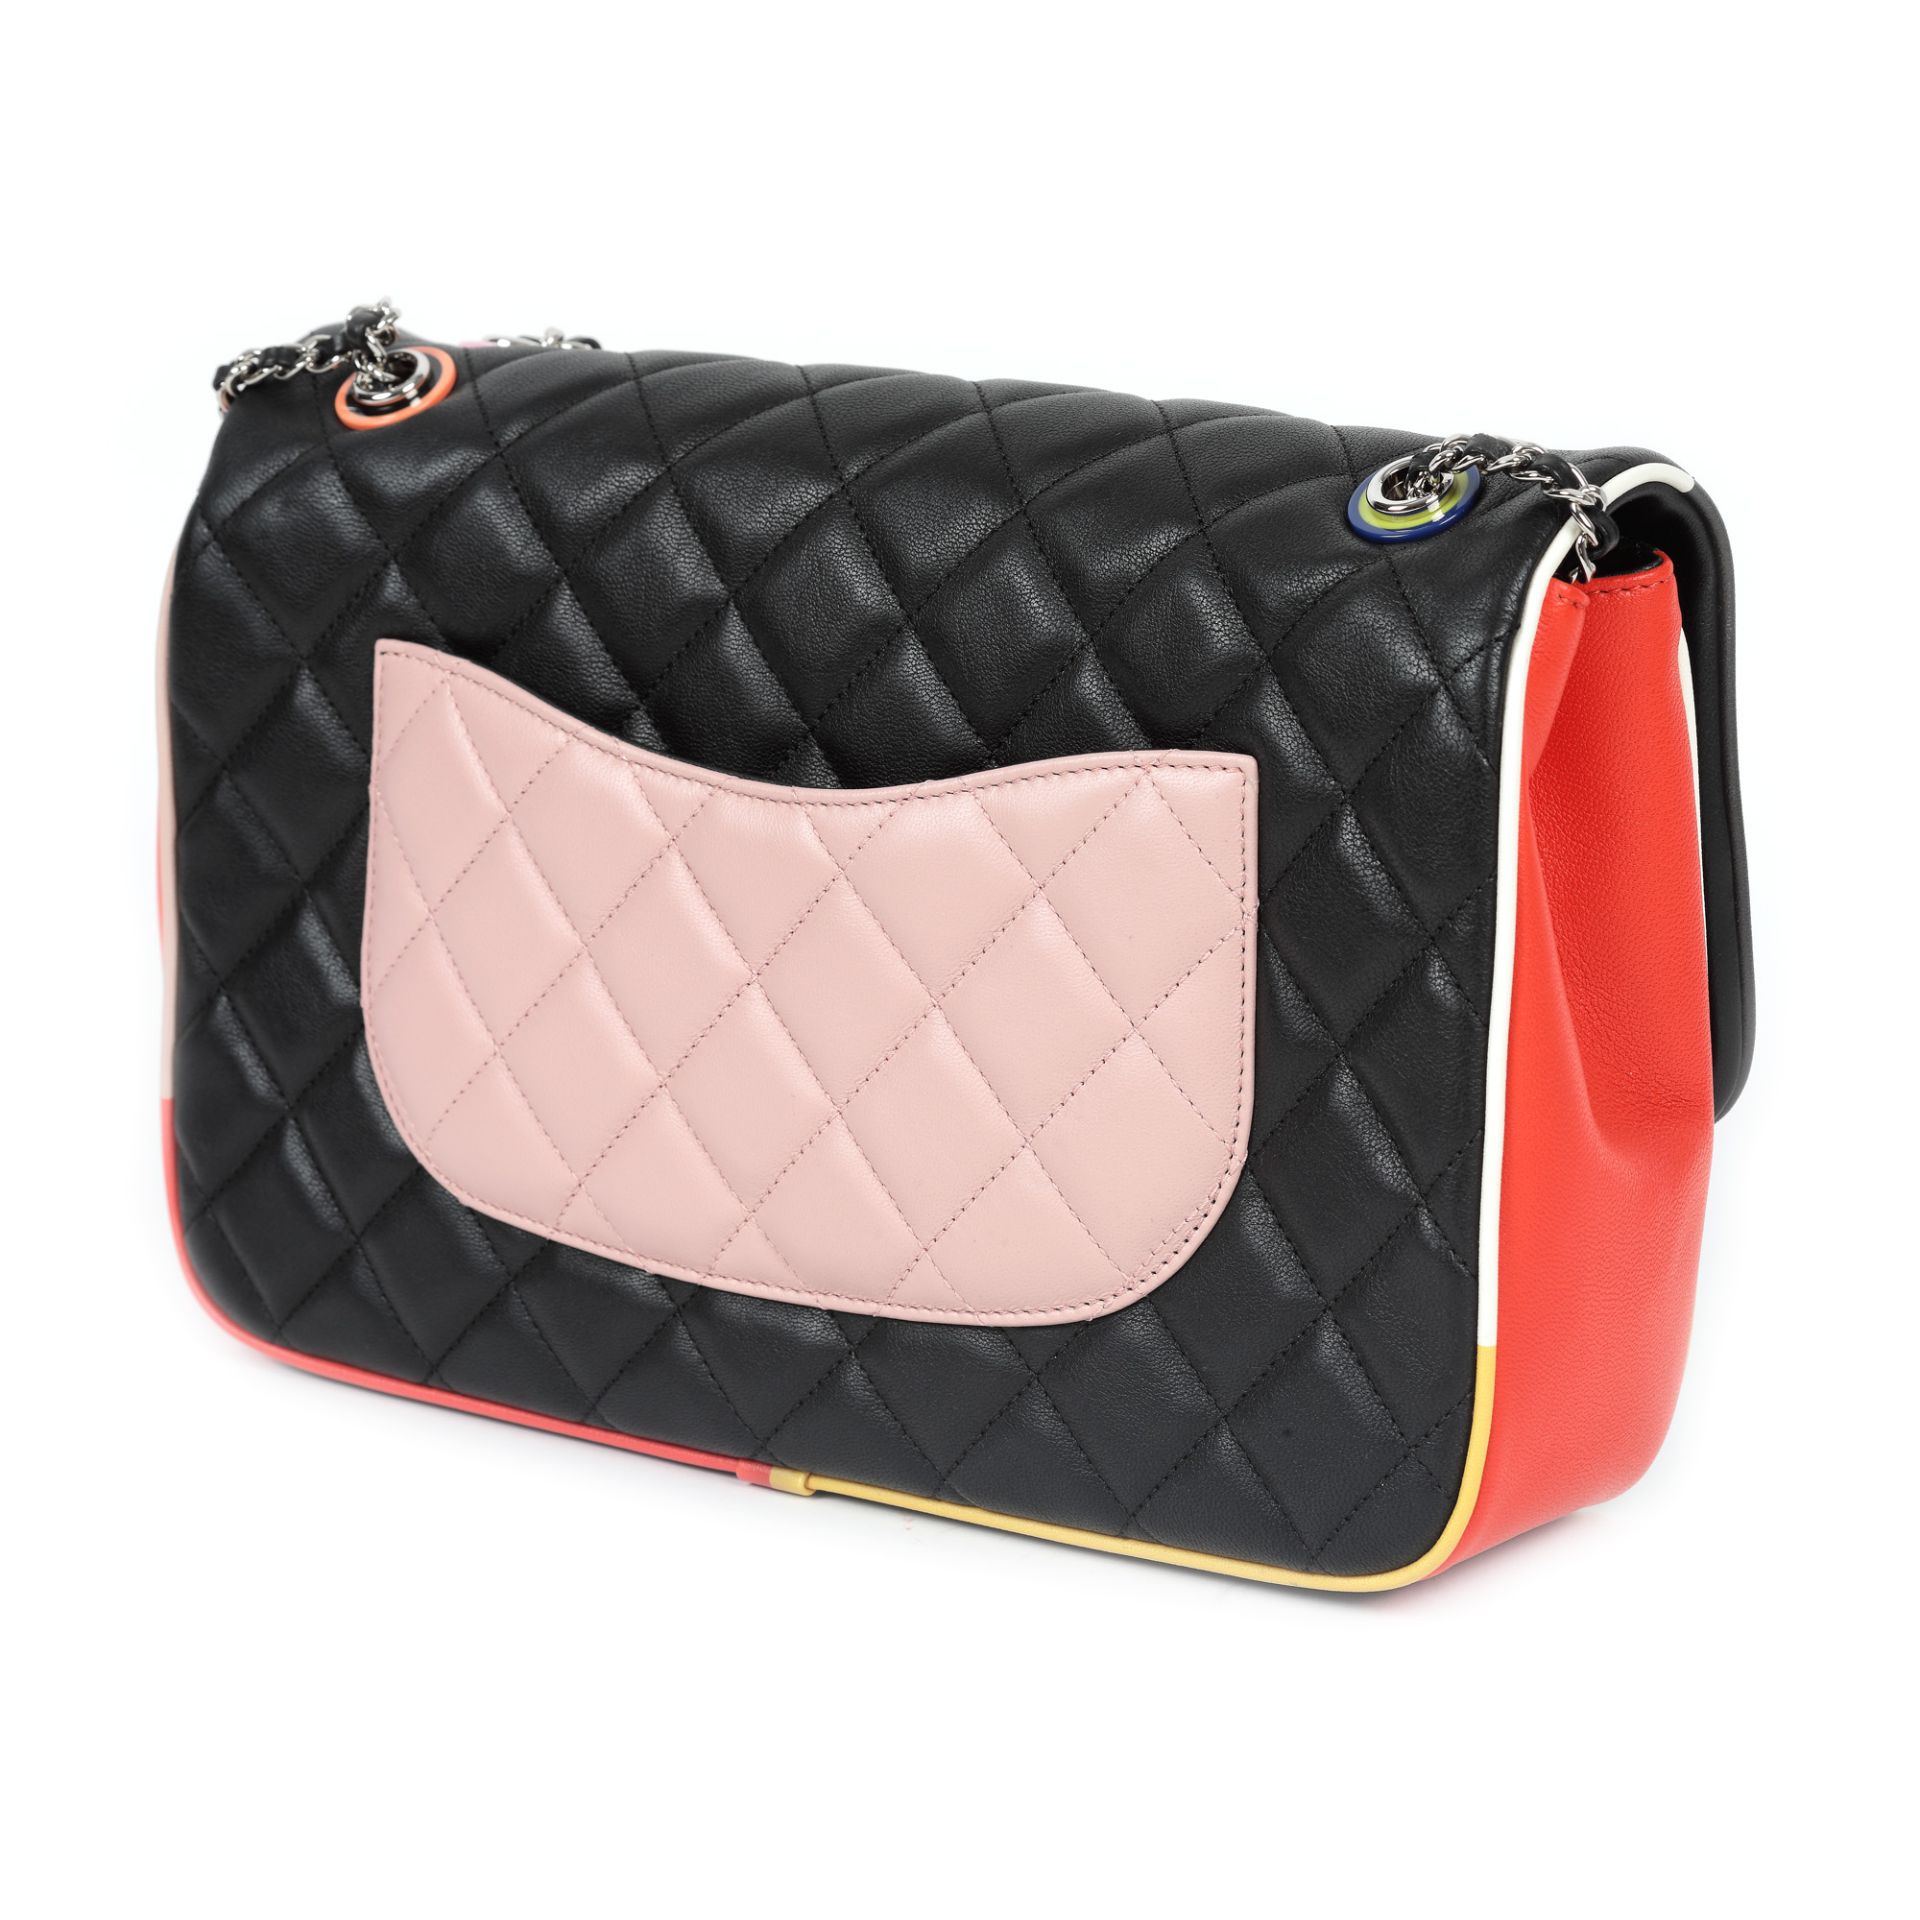 "Classic Flap Bag" - Chanel bag, quilted leather, black, with coloured resin details, authenticity c - Image 3 of 6